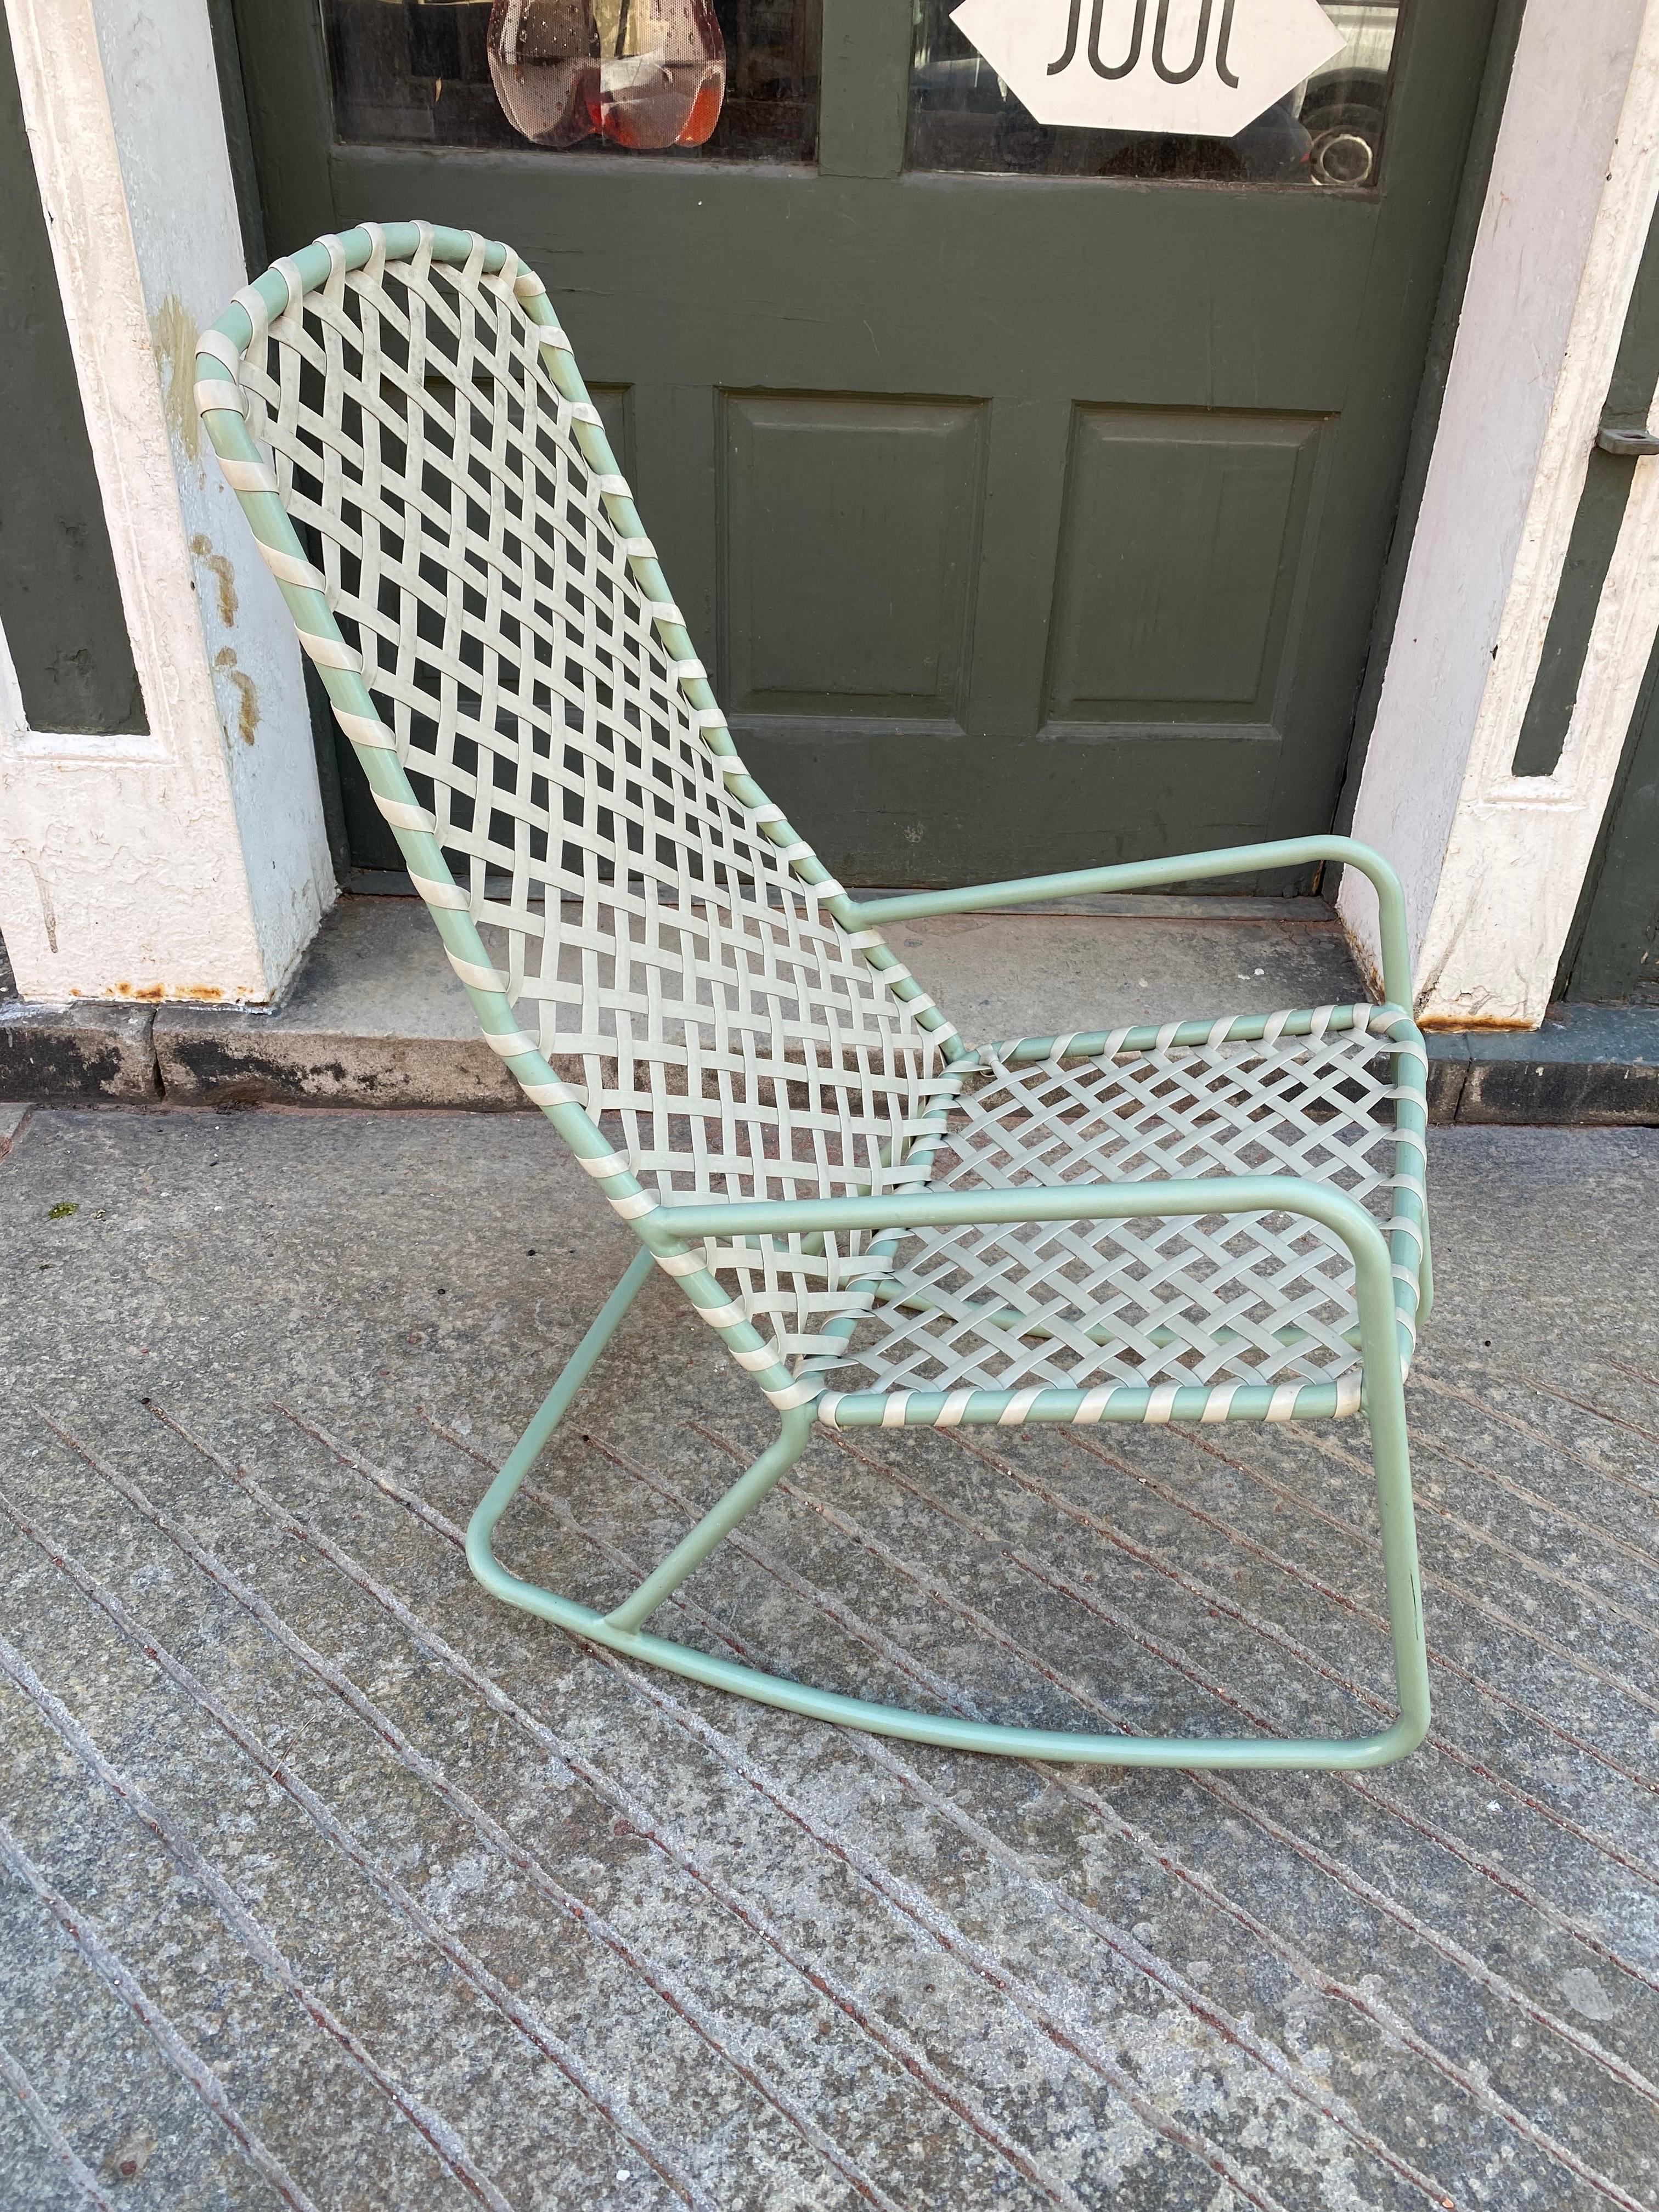 Brown Jordan Aluminum Rocker with Woven Straps.  Frame is in a light green finish.  All original and in nice condition.  Matching Chairs and Table Available as well!